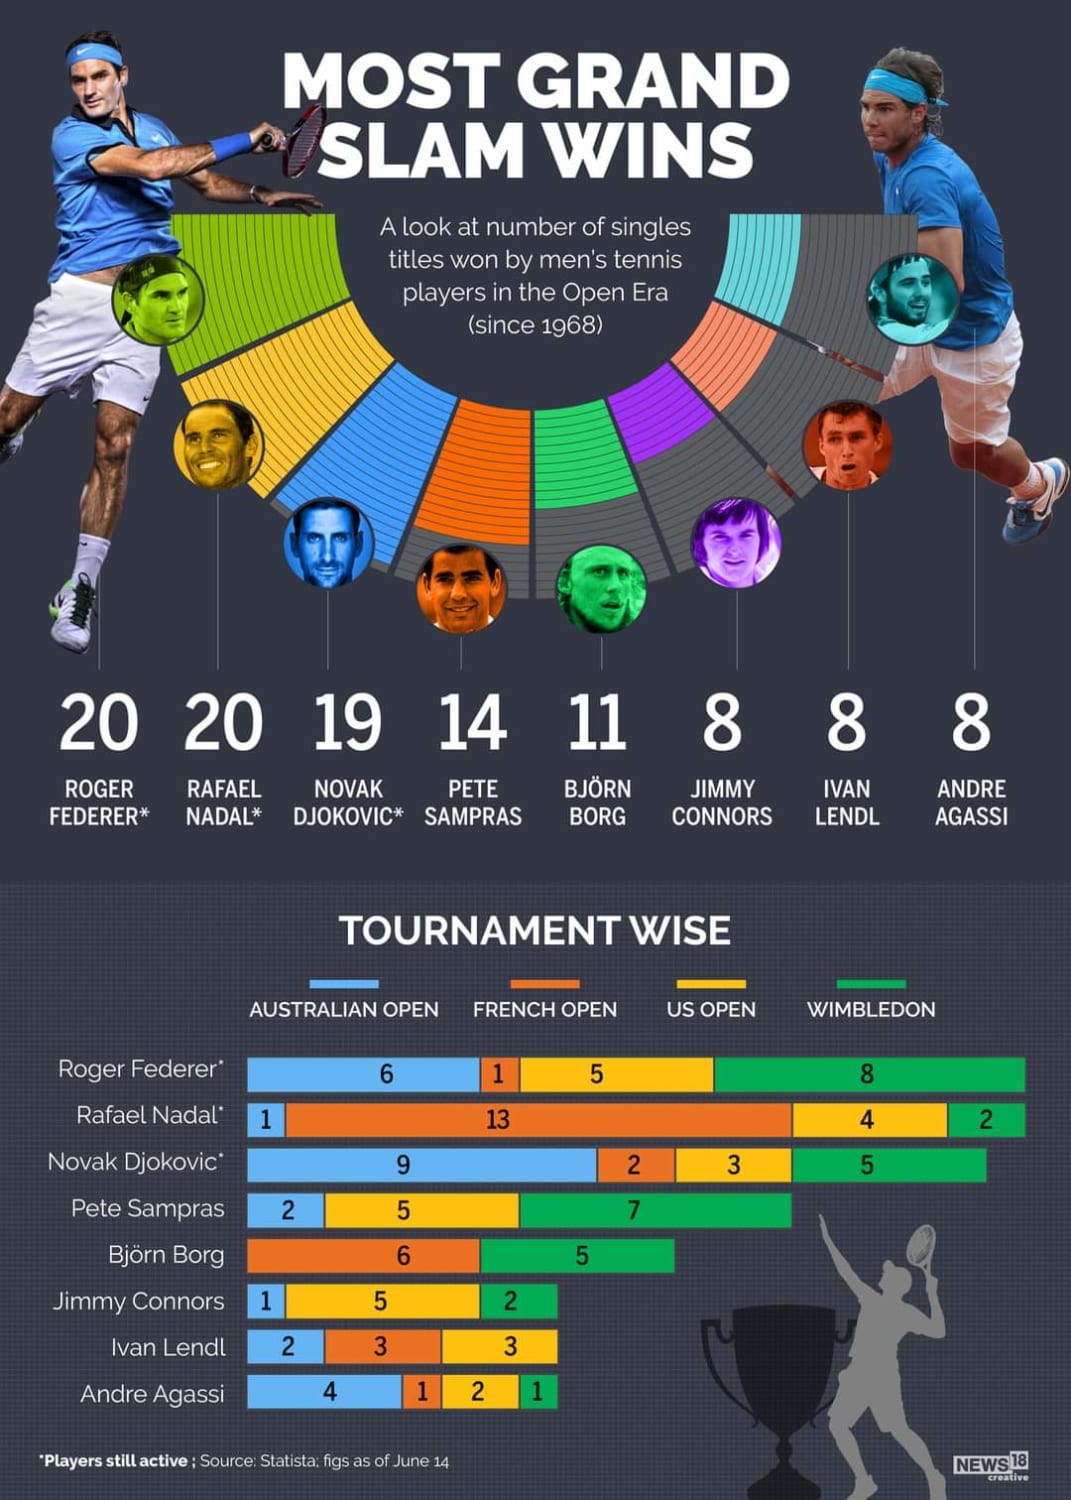 Most Grand Slam Wins: A look at number of singles titles won by men's tennis players in the open era